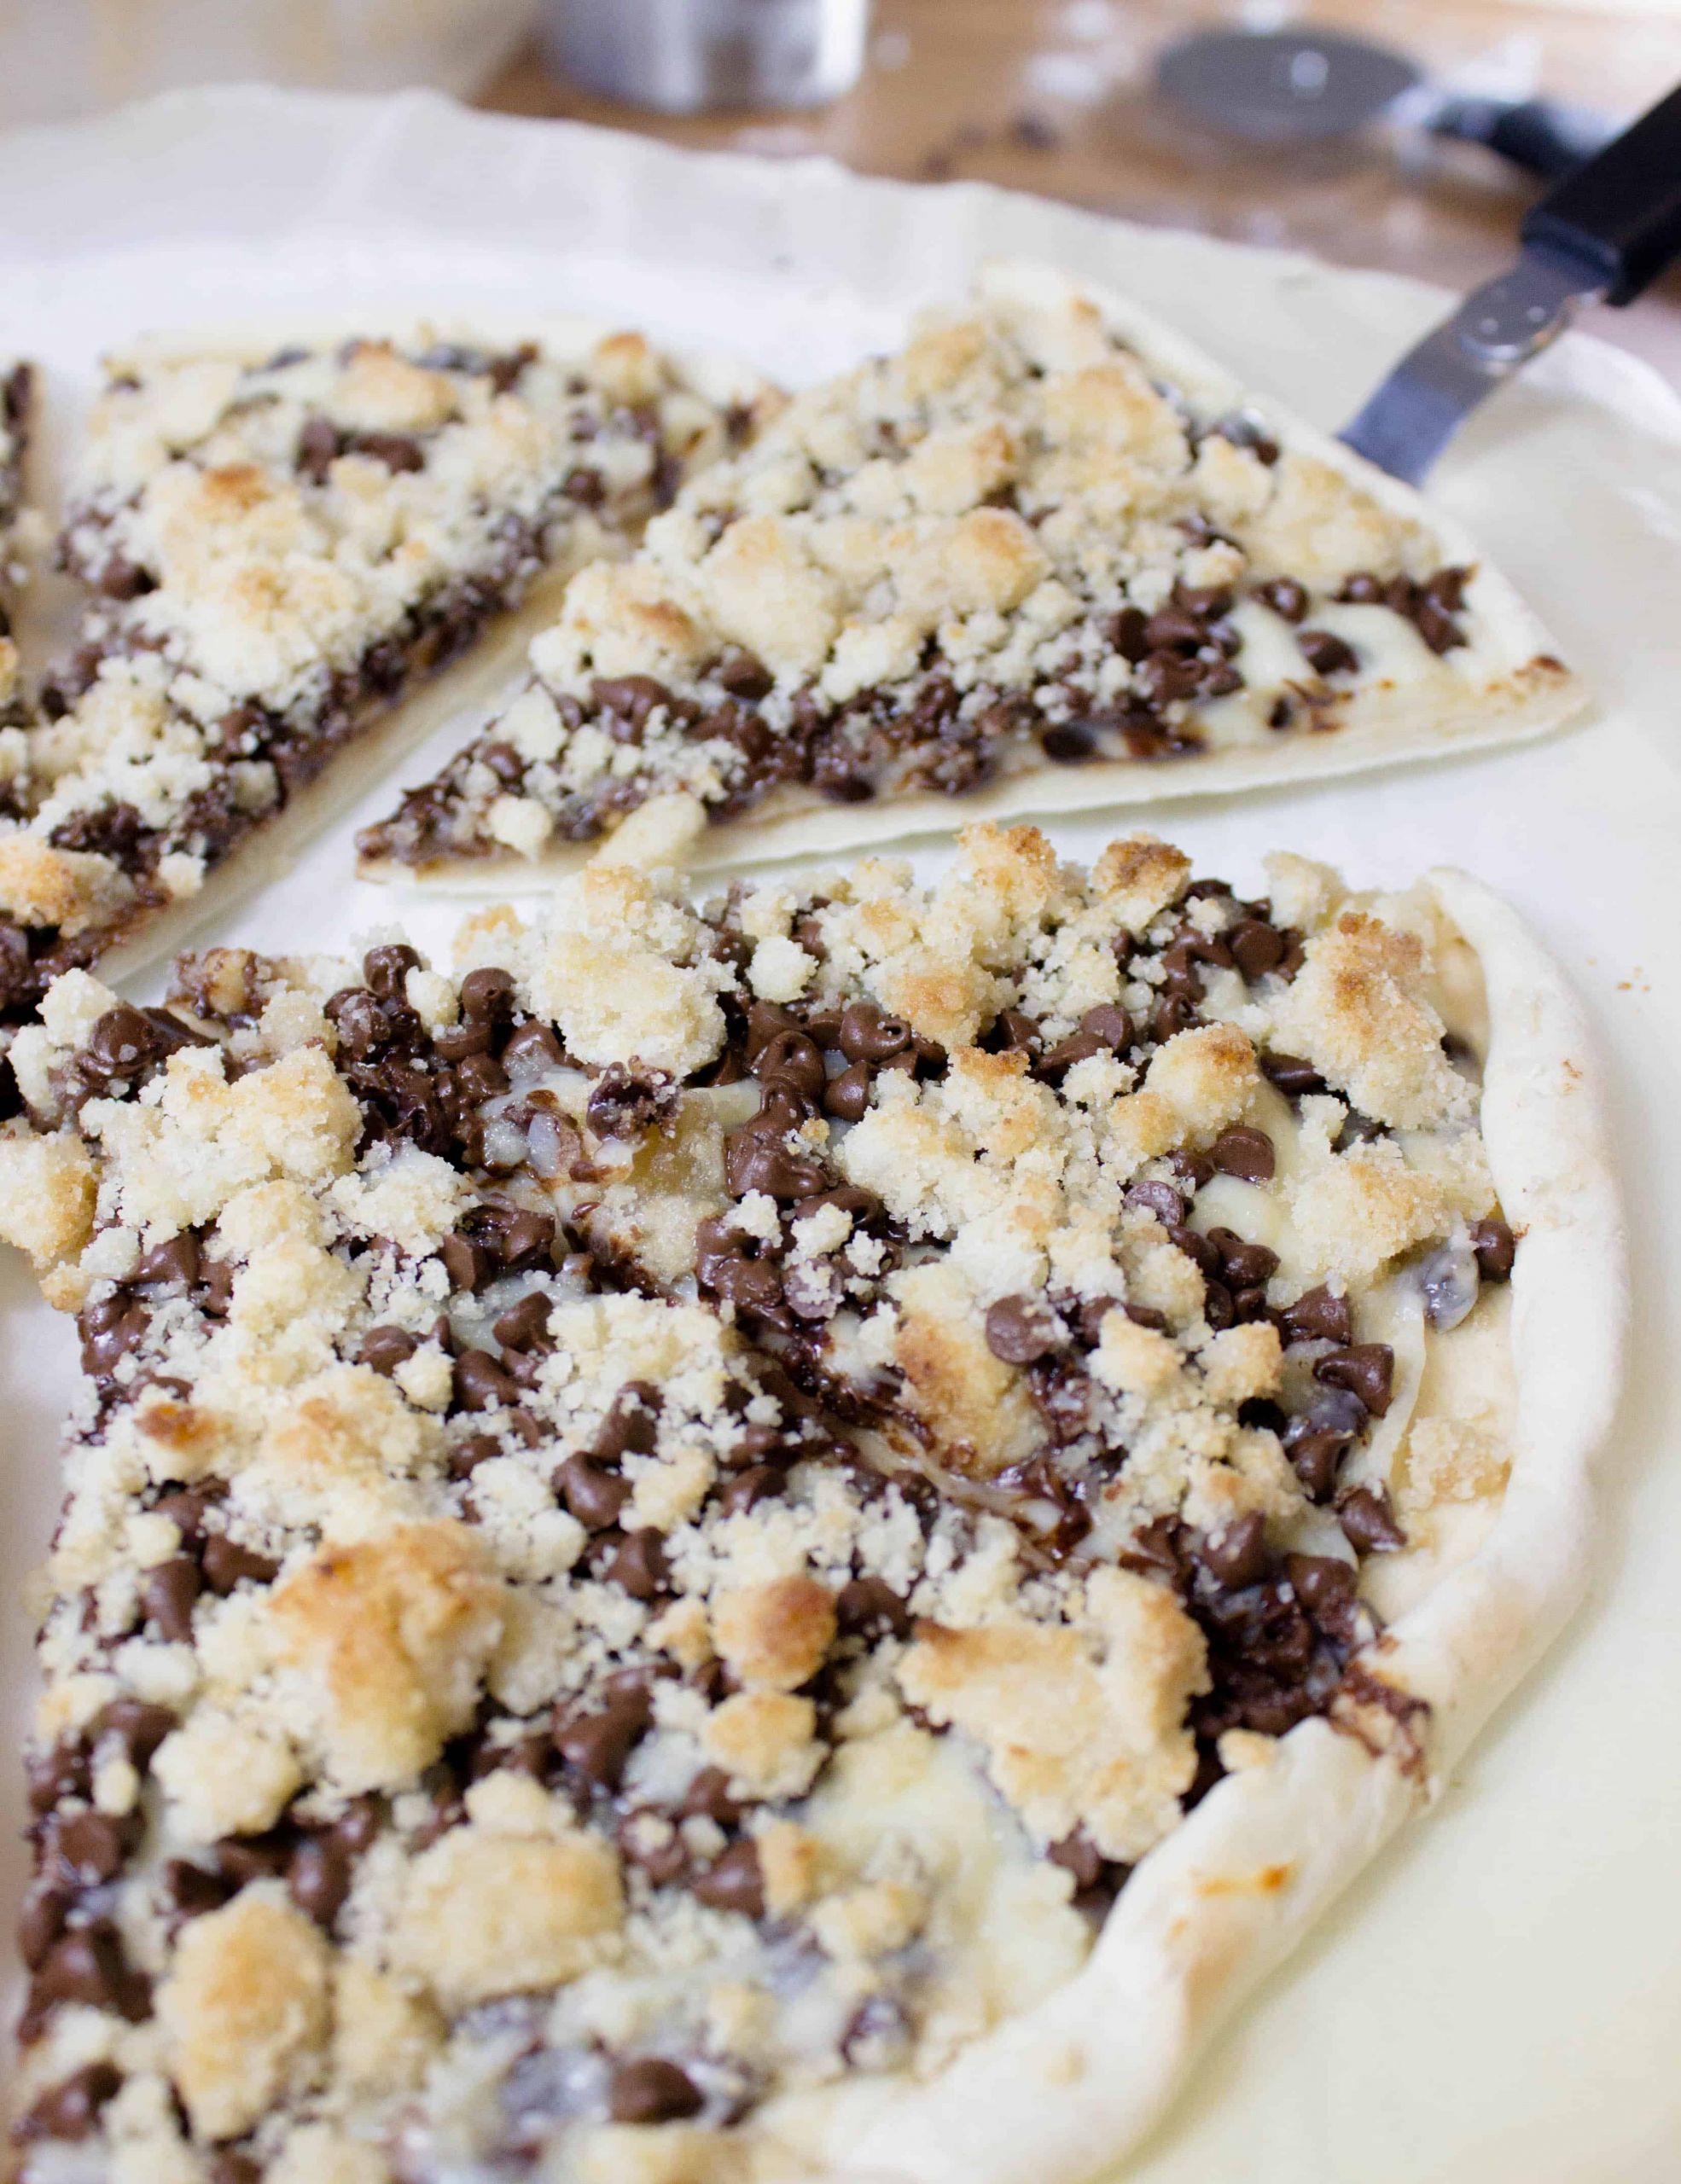 Chocolate Dessert Pizza Awesome Diy Dessert Pizzas that Will Make Your Mouth Water